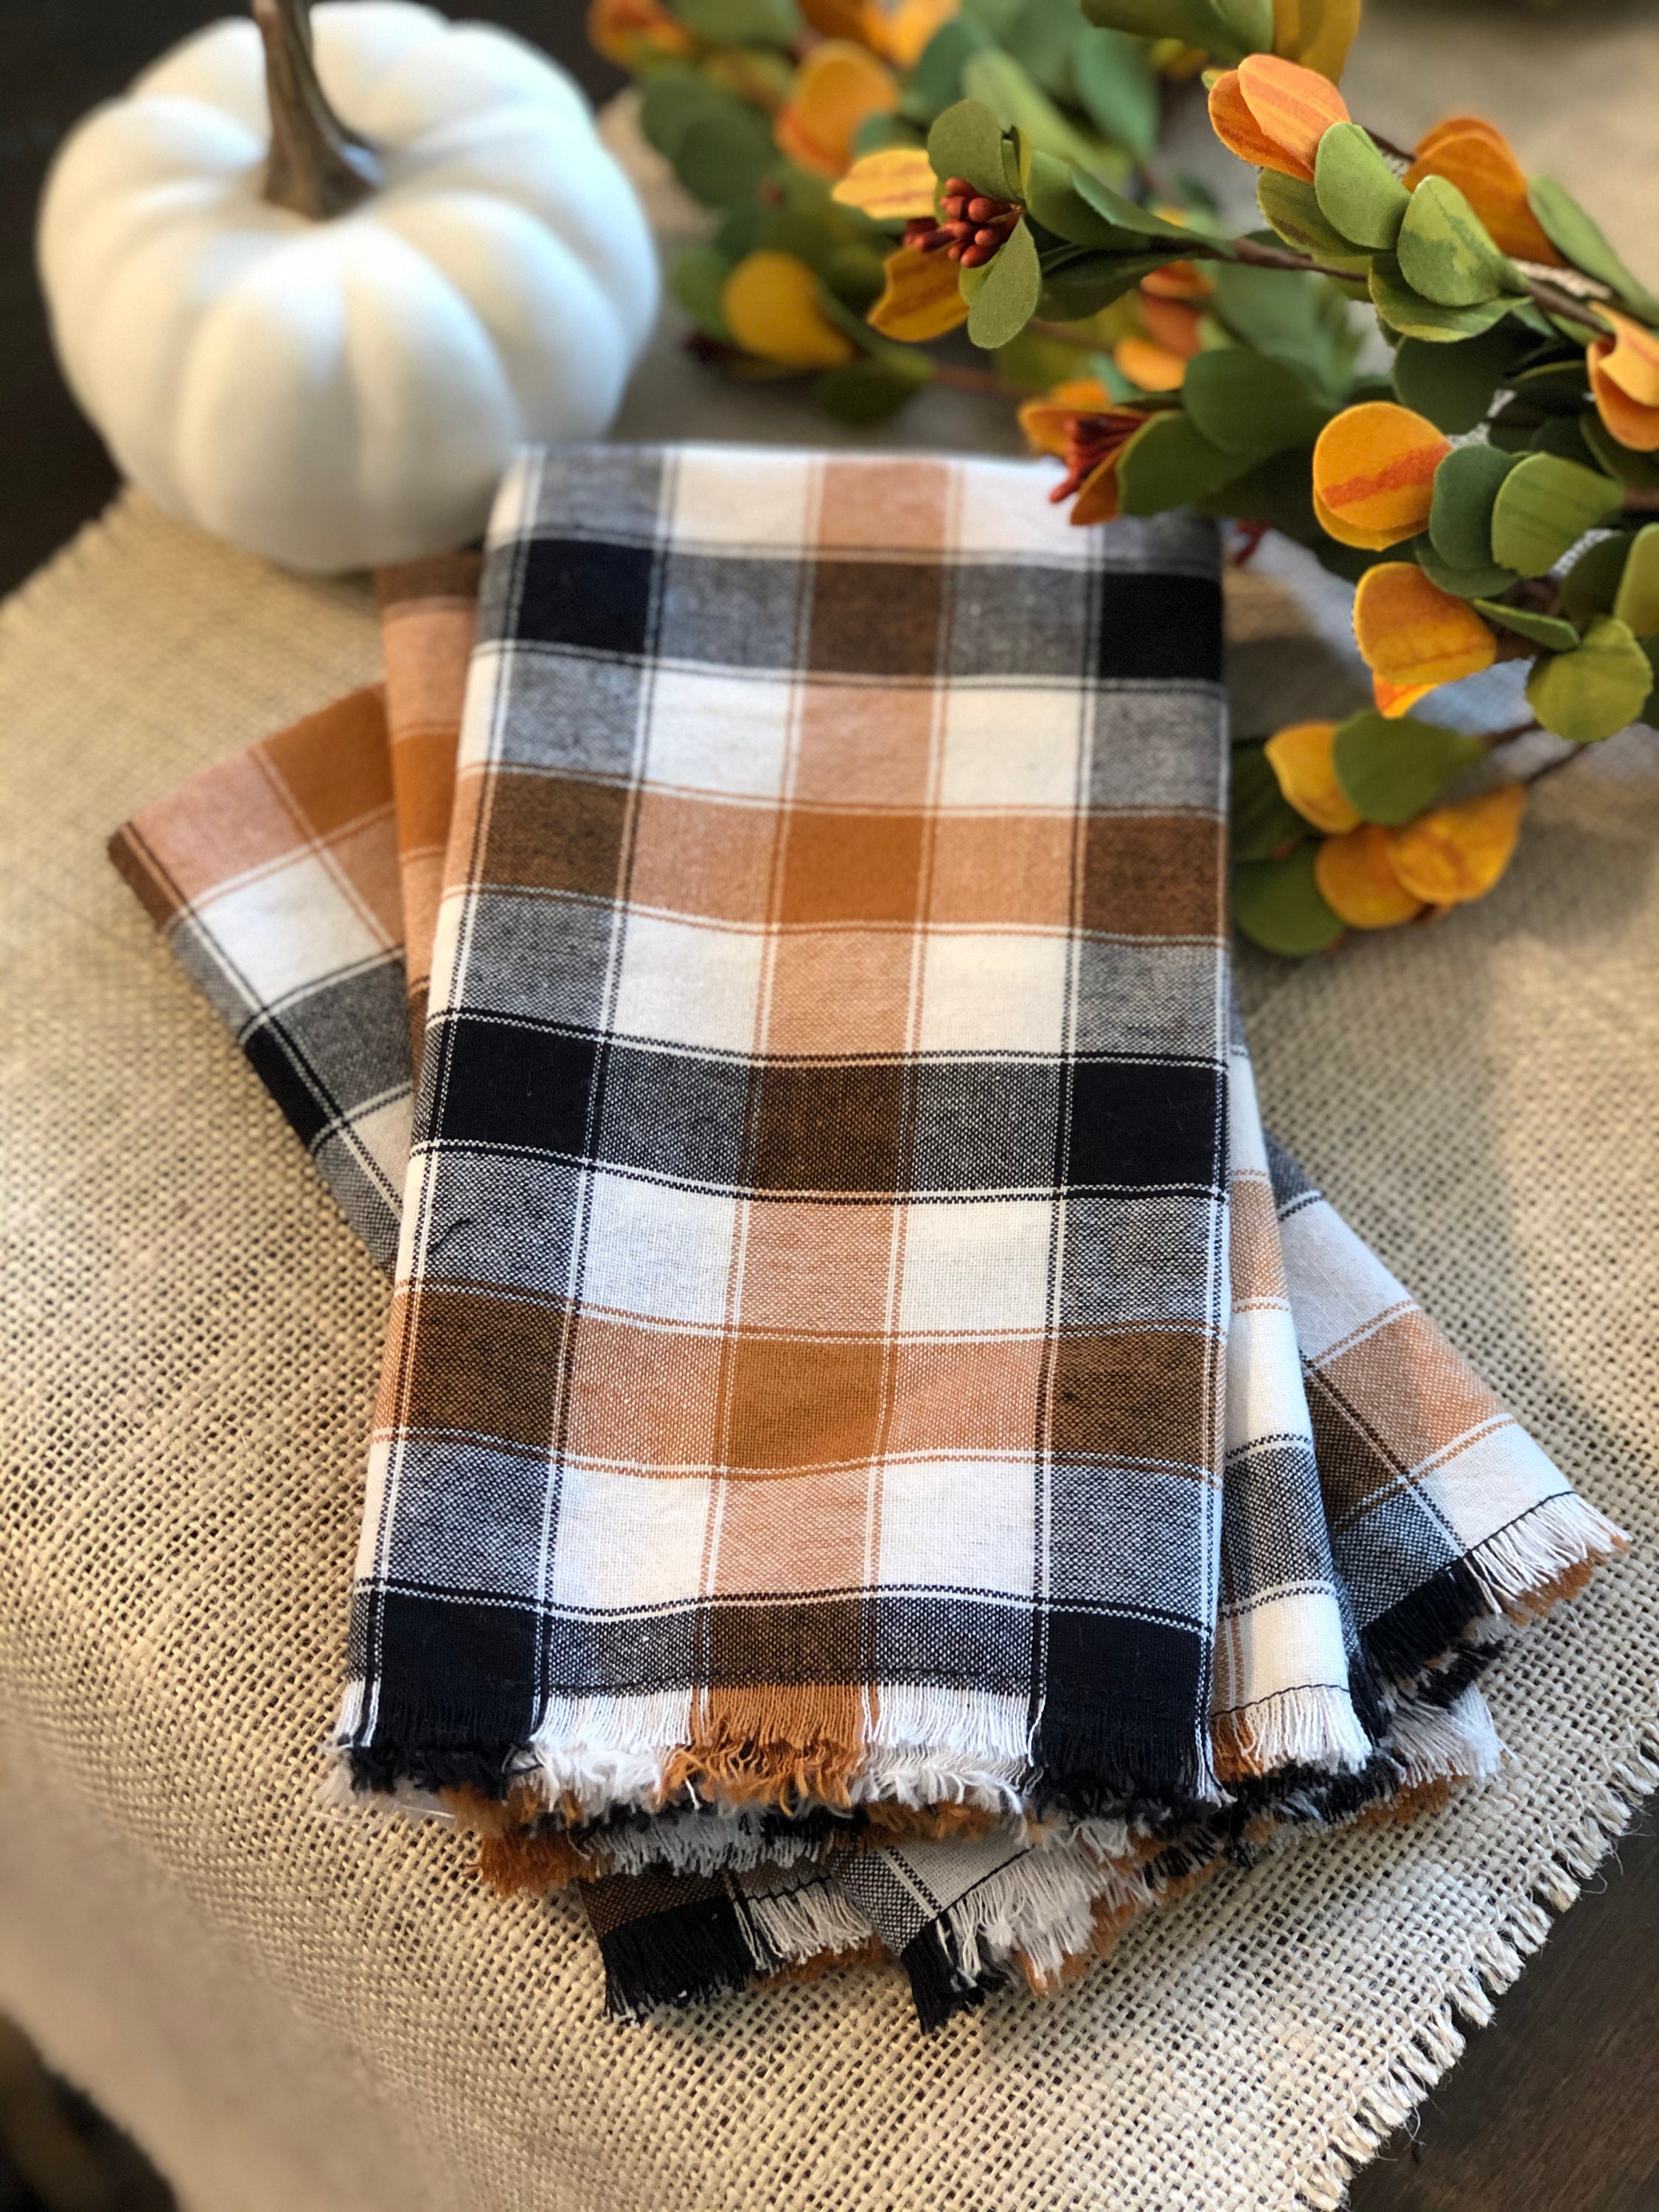 Fennco Styles Autumn Buffalo Plaid Cotton Cloth Napkins 20 W x 20 L, Set  of 4 - Orange Dinner Napkins for Everyday Use, Home, Dining Table Décor,  Banquets, Christmas, Special Events 